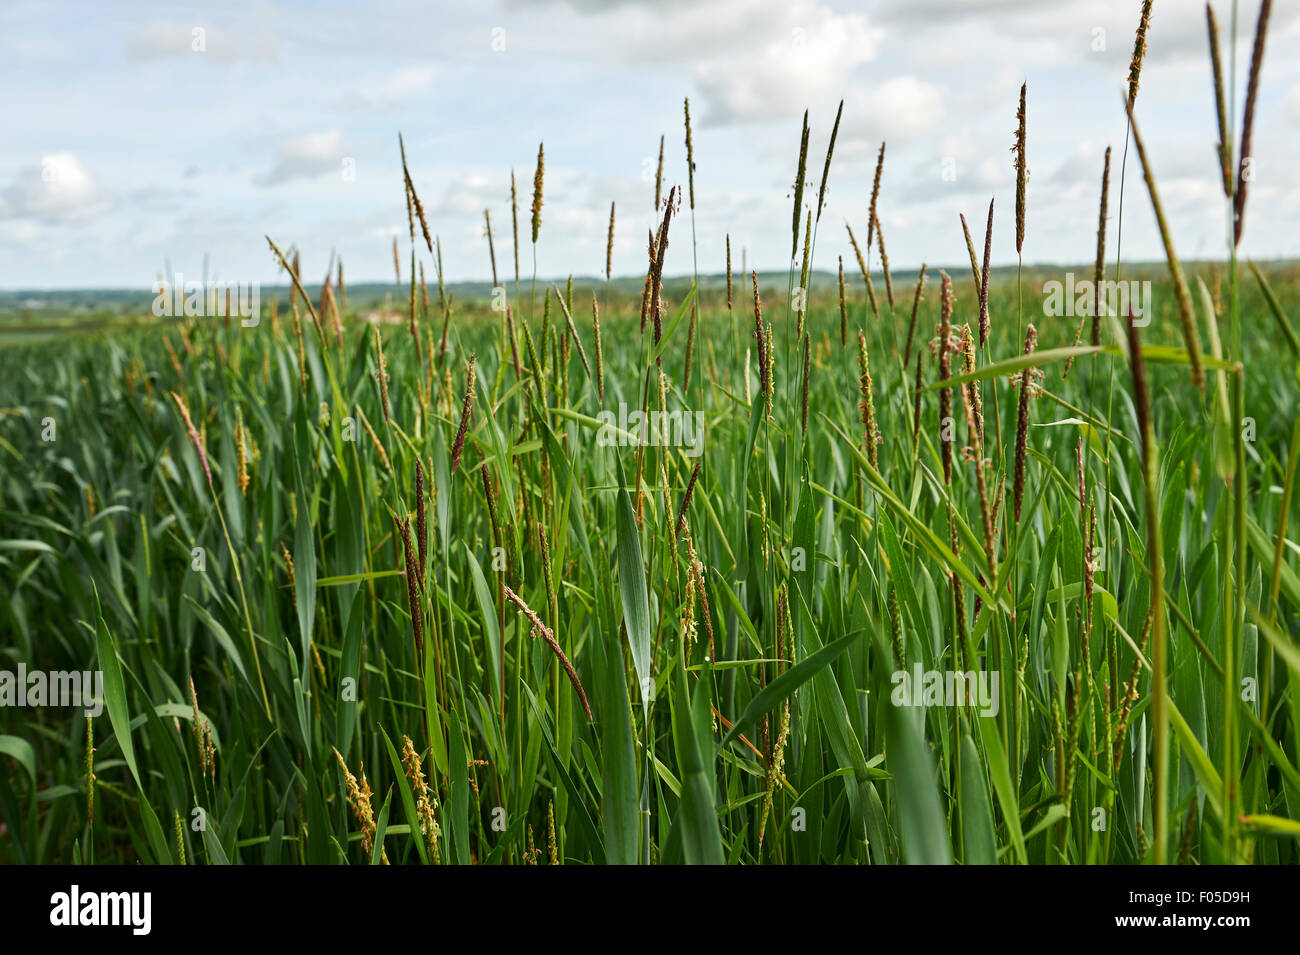 English fields of Wheat with a significant quantity of Black Grass (Alopecurus myosuroides) growing amongst it. Stock Photo